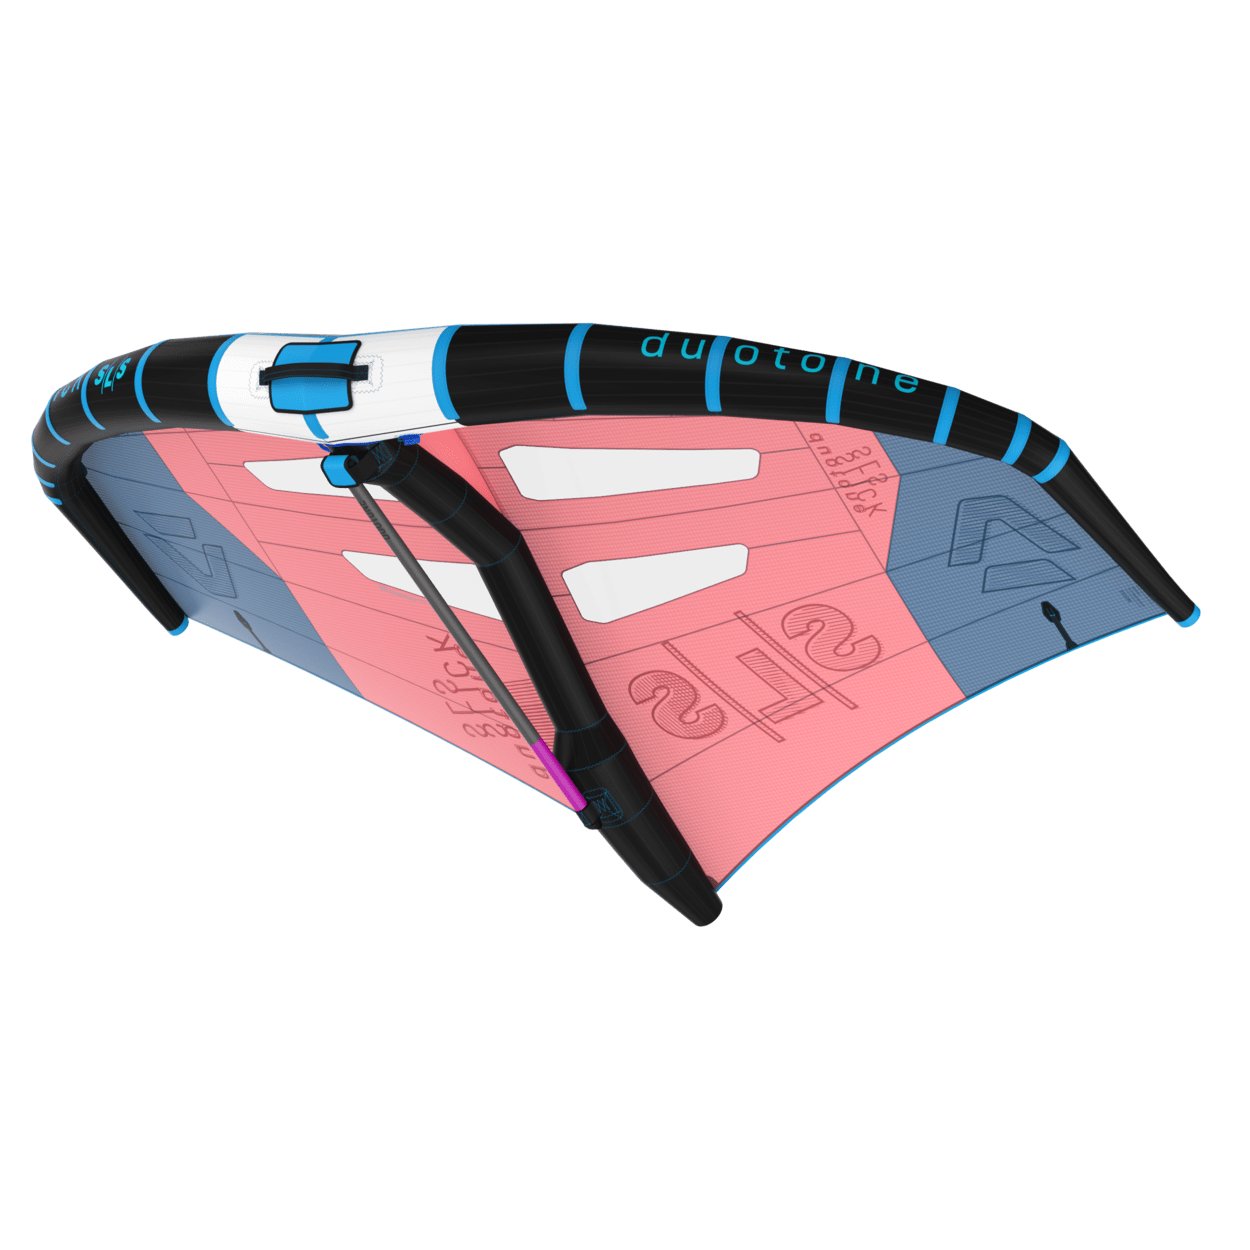 Duotone Foil Wing Slick SLS 2022 - Worthing Watersports - 9010583120478 - Foilwing - Duotone X